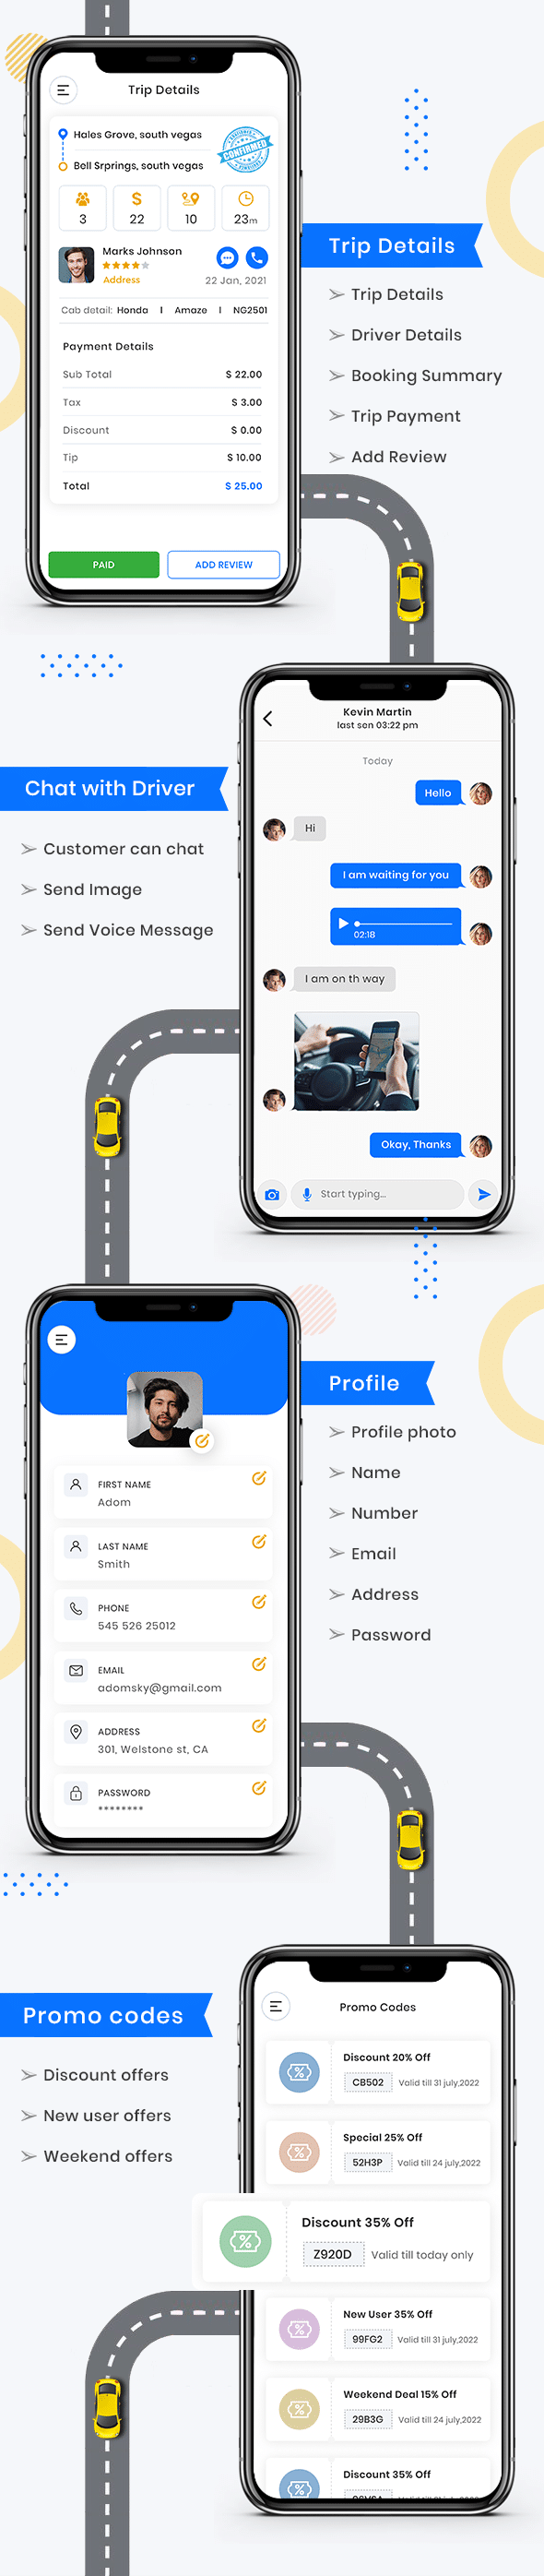 CabME - Flutter Complete Taxi app | Taxi Booking Solution - 9